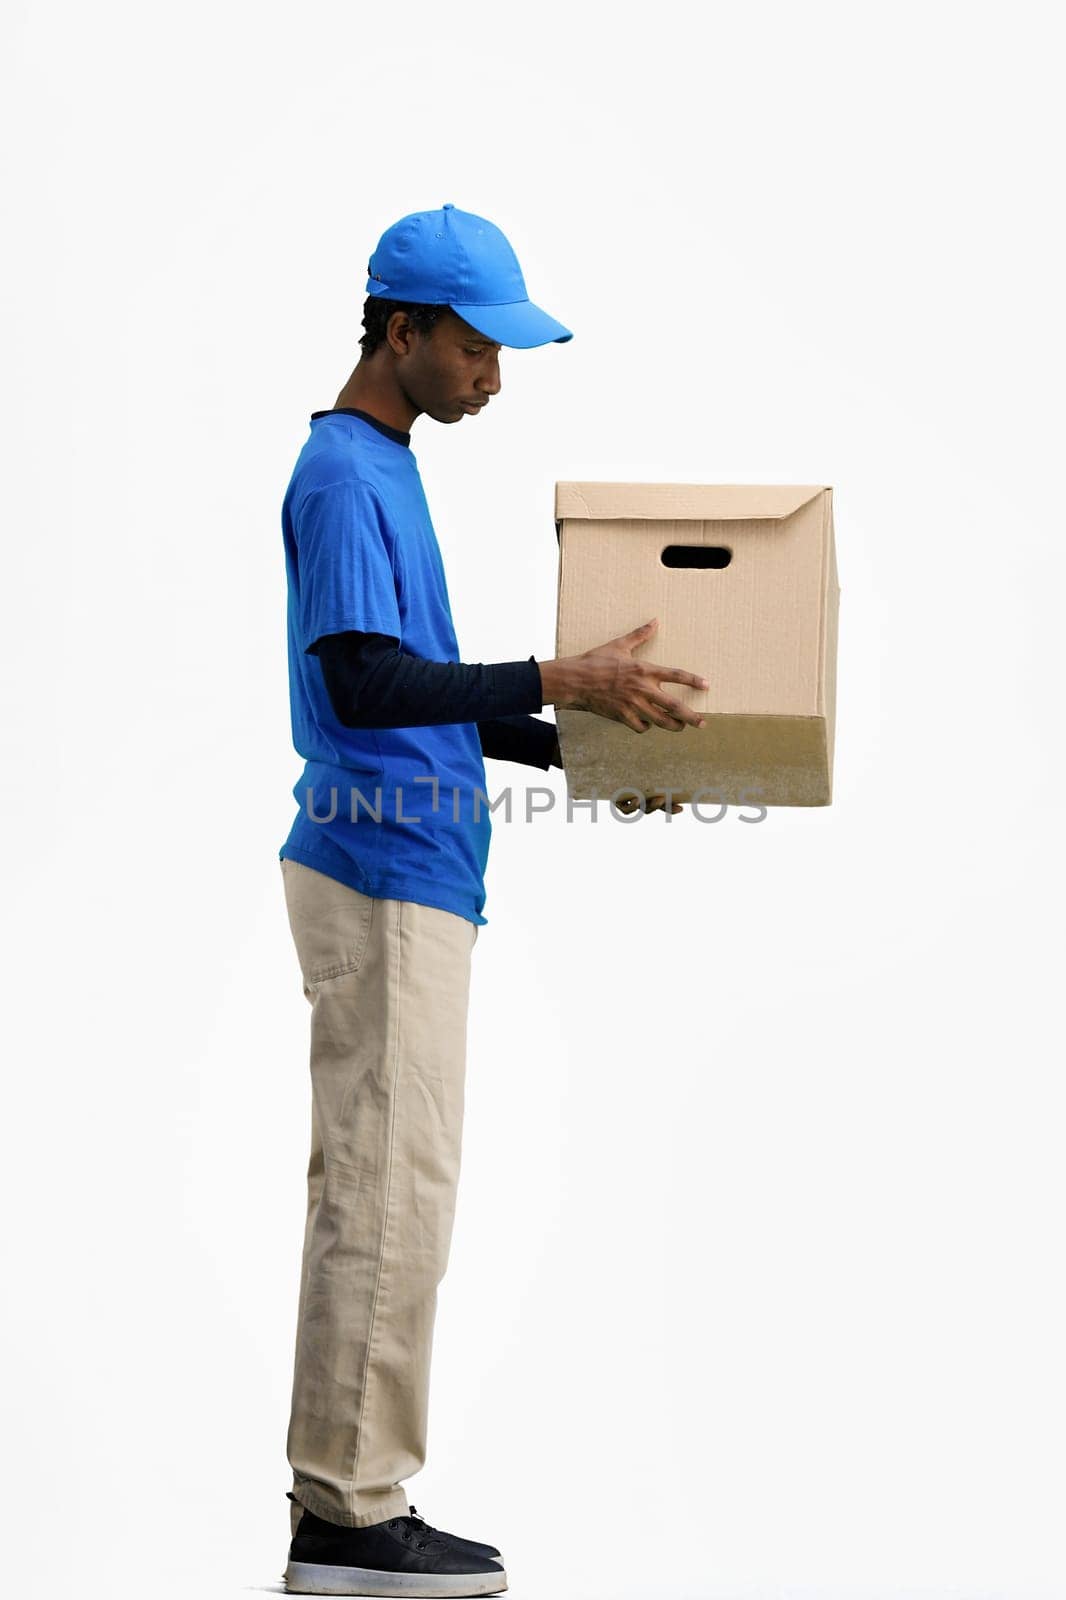 The deliveryman, in full height, on a white background, examines the box by Prosto